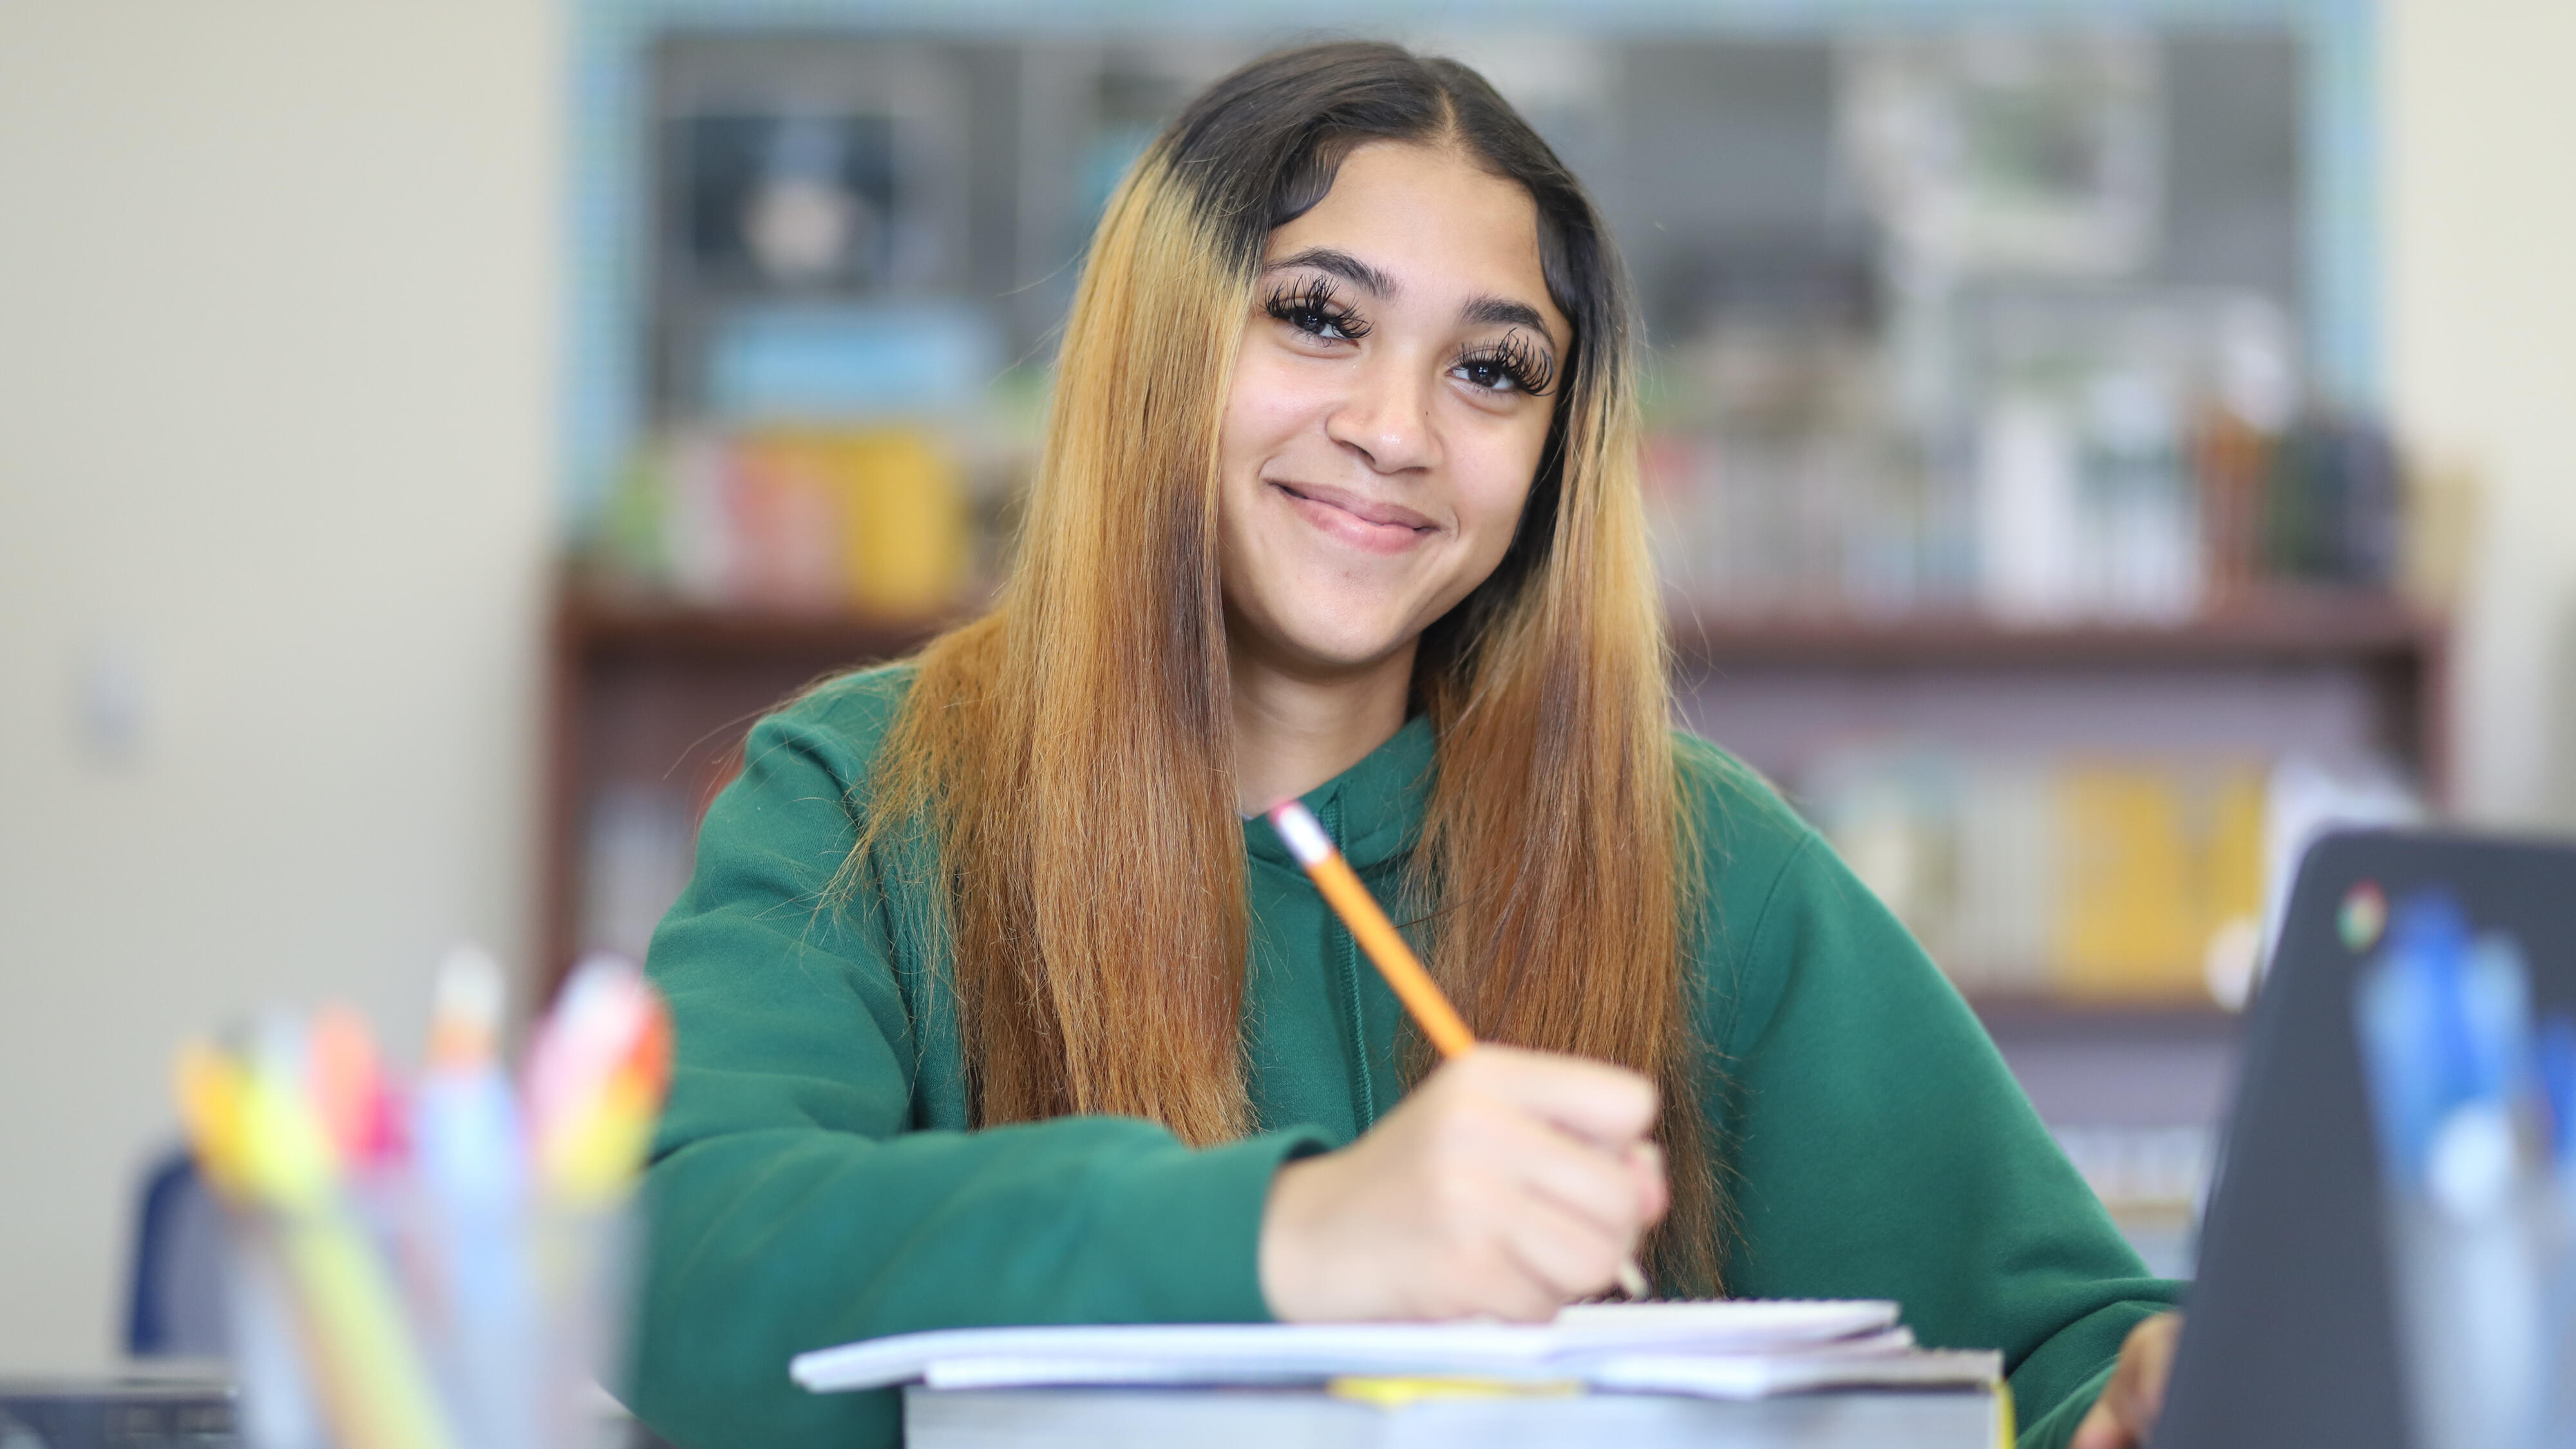 Student smiling while working on a math assignment